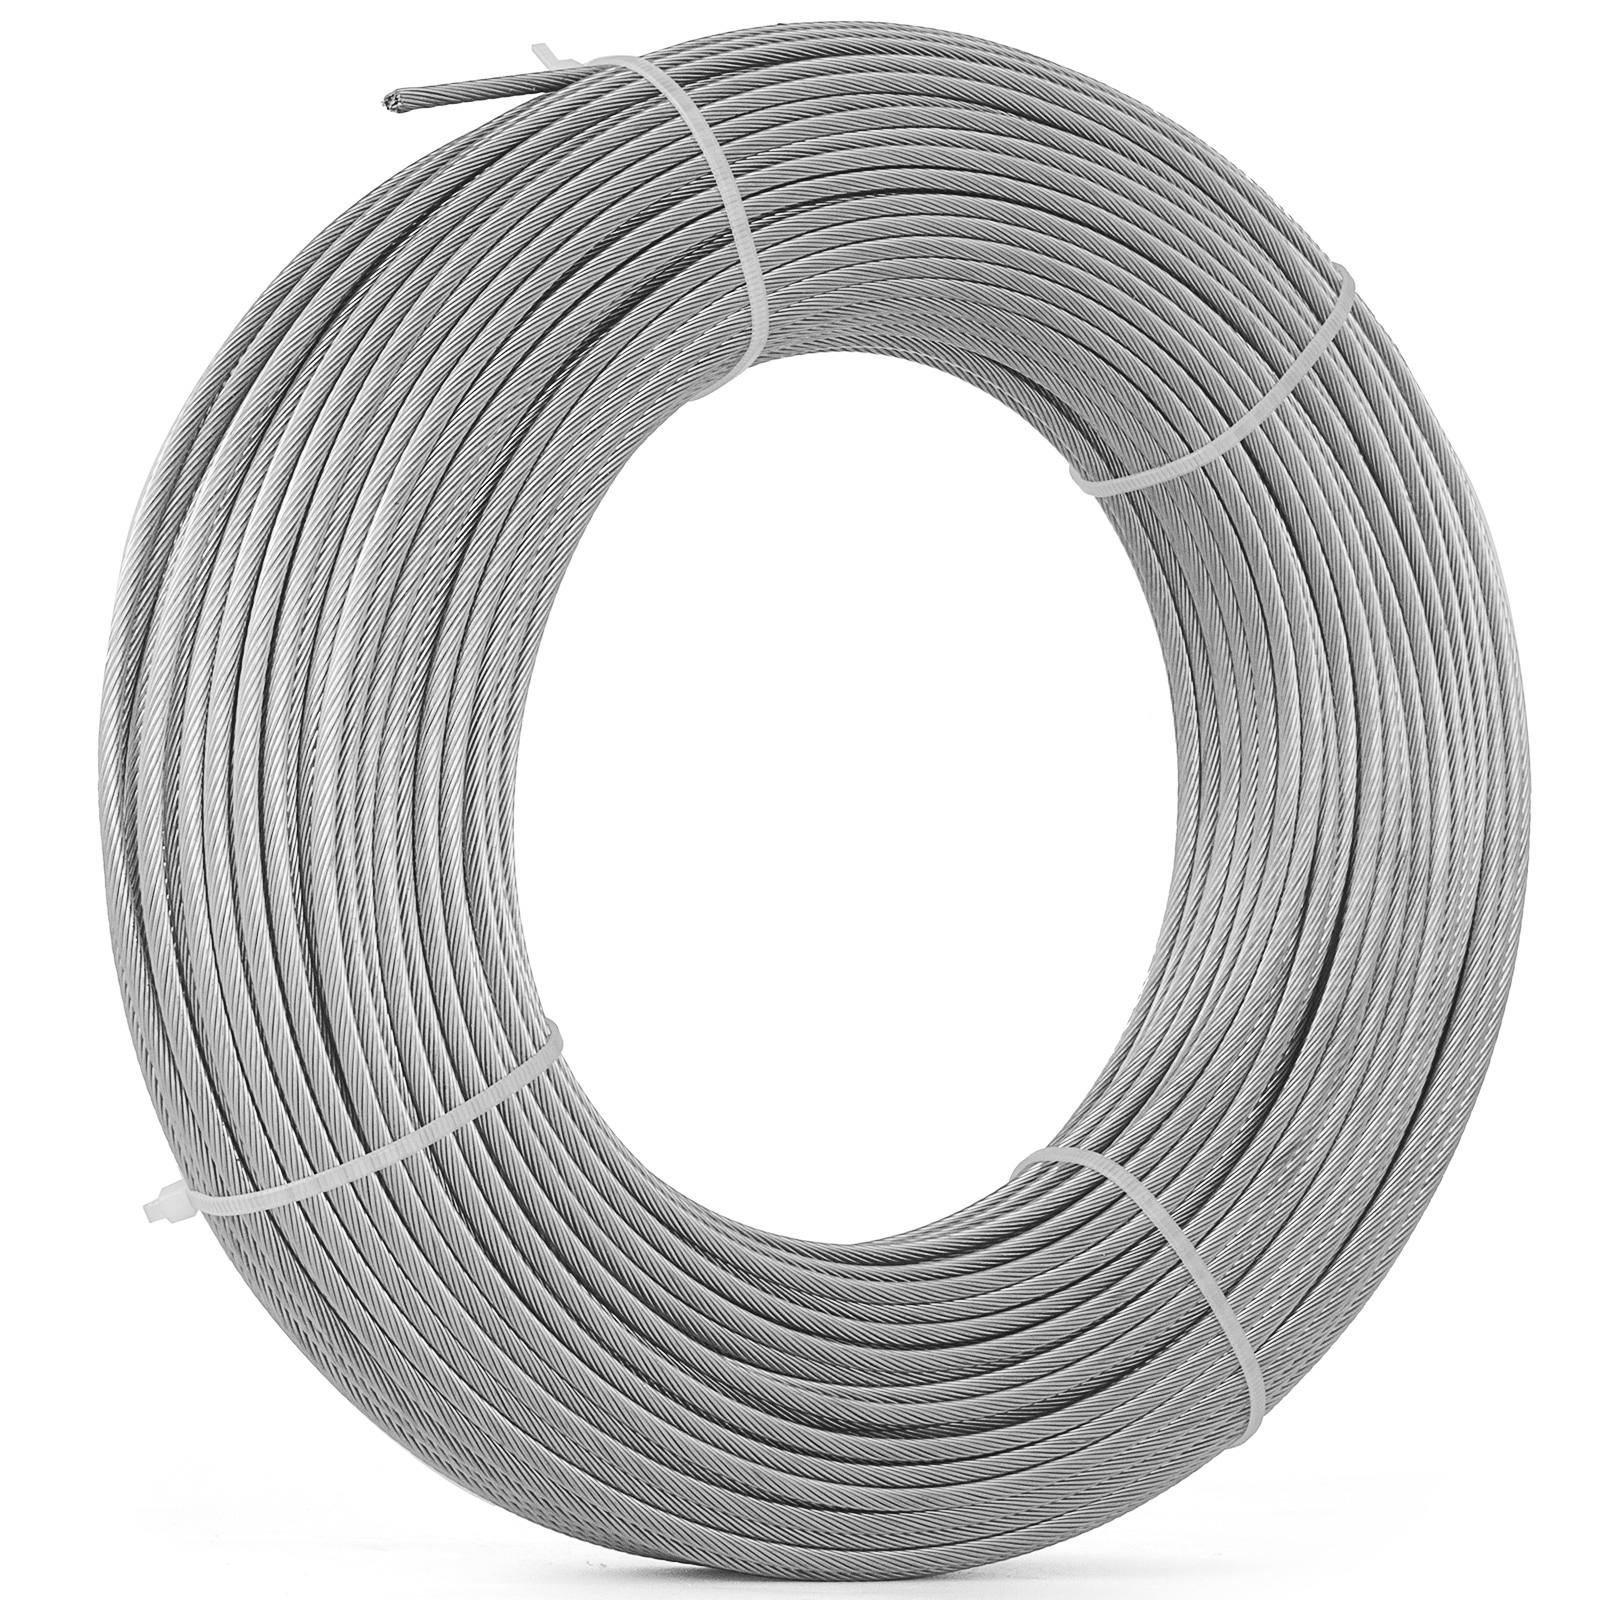 Cable Railing Type 316 Stainless Steel Wire Rope Cable 1000 ft 100 1/8" 7x7 